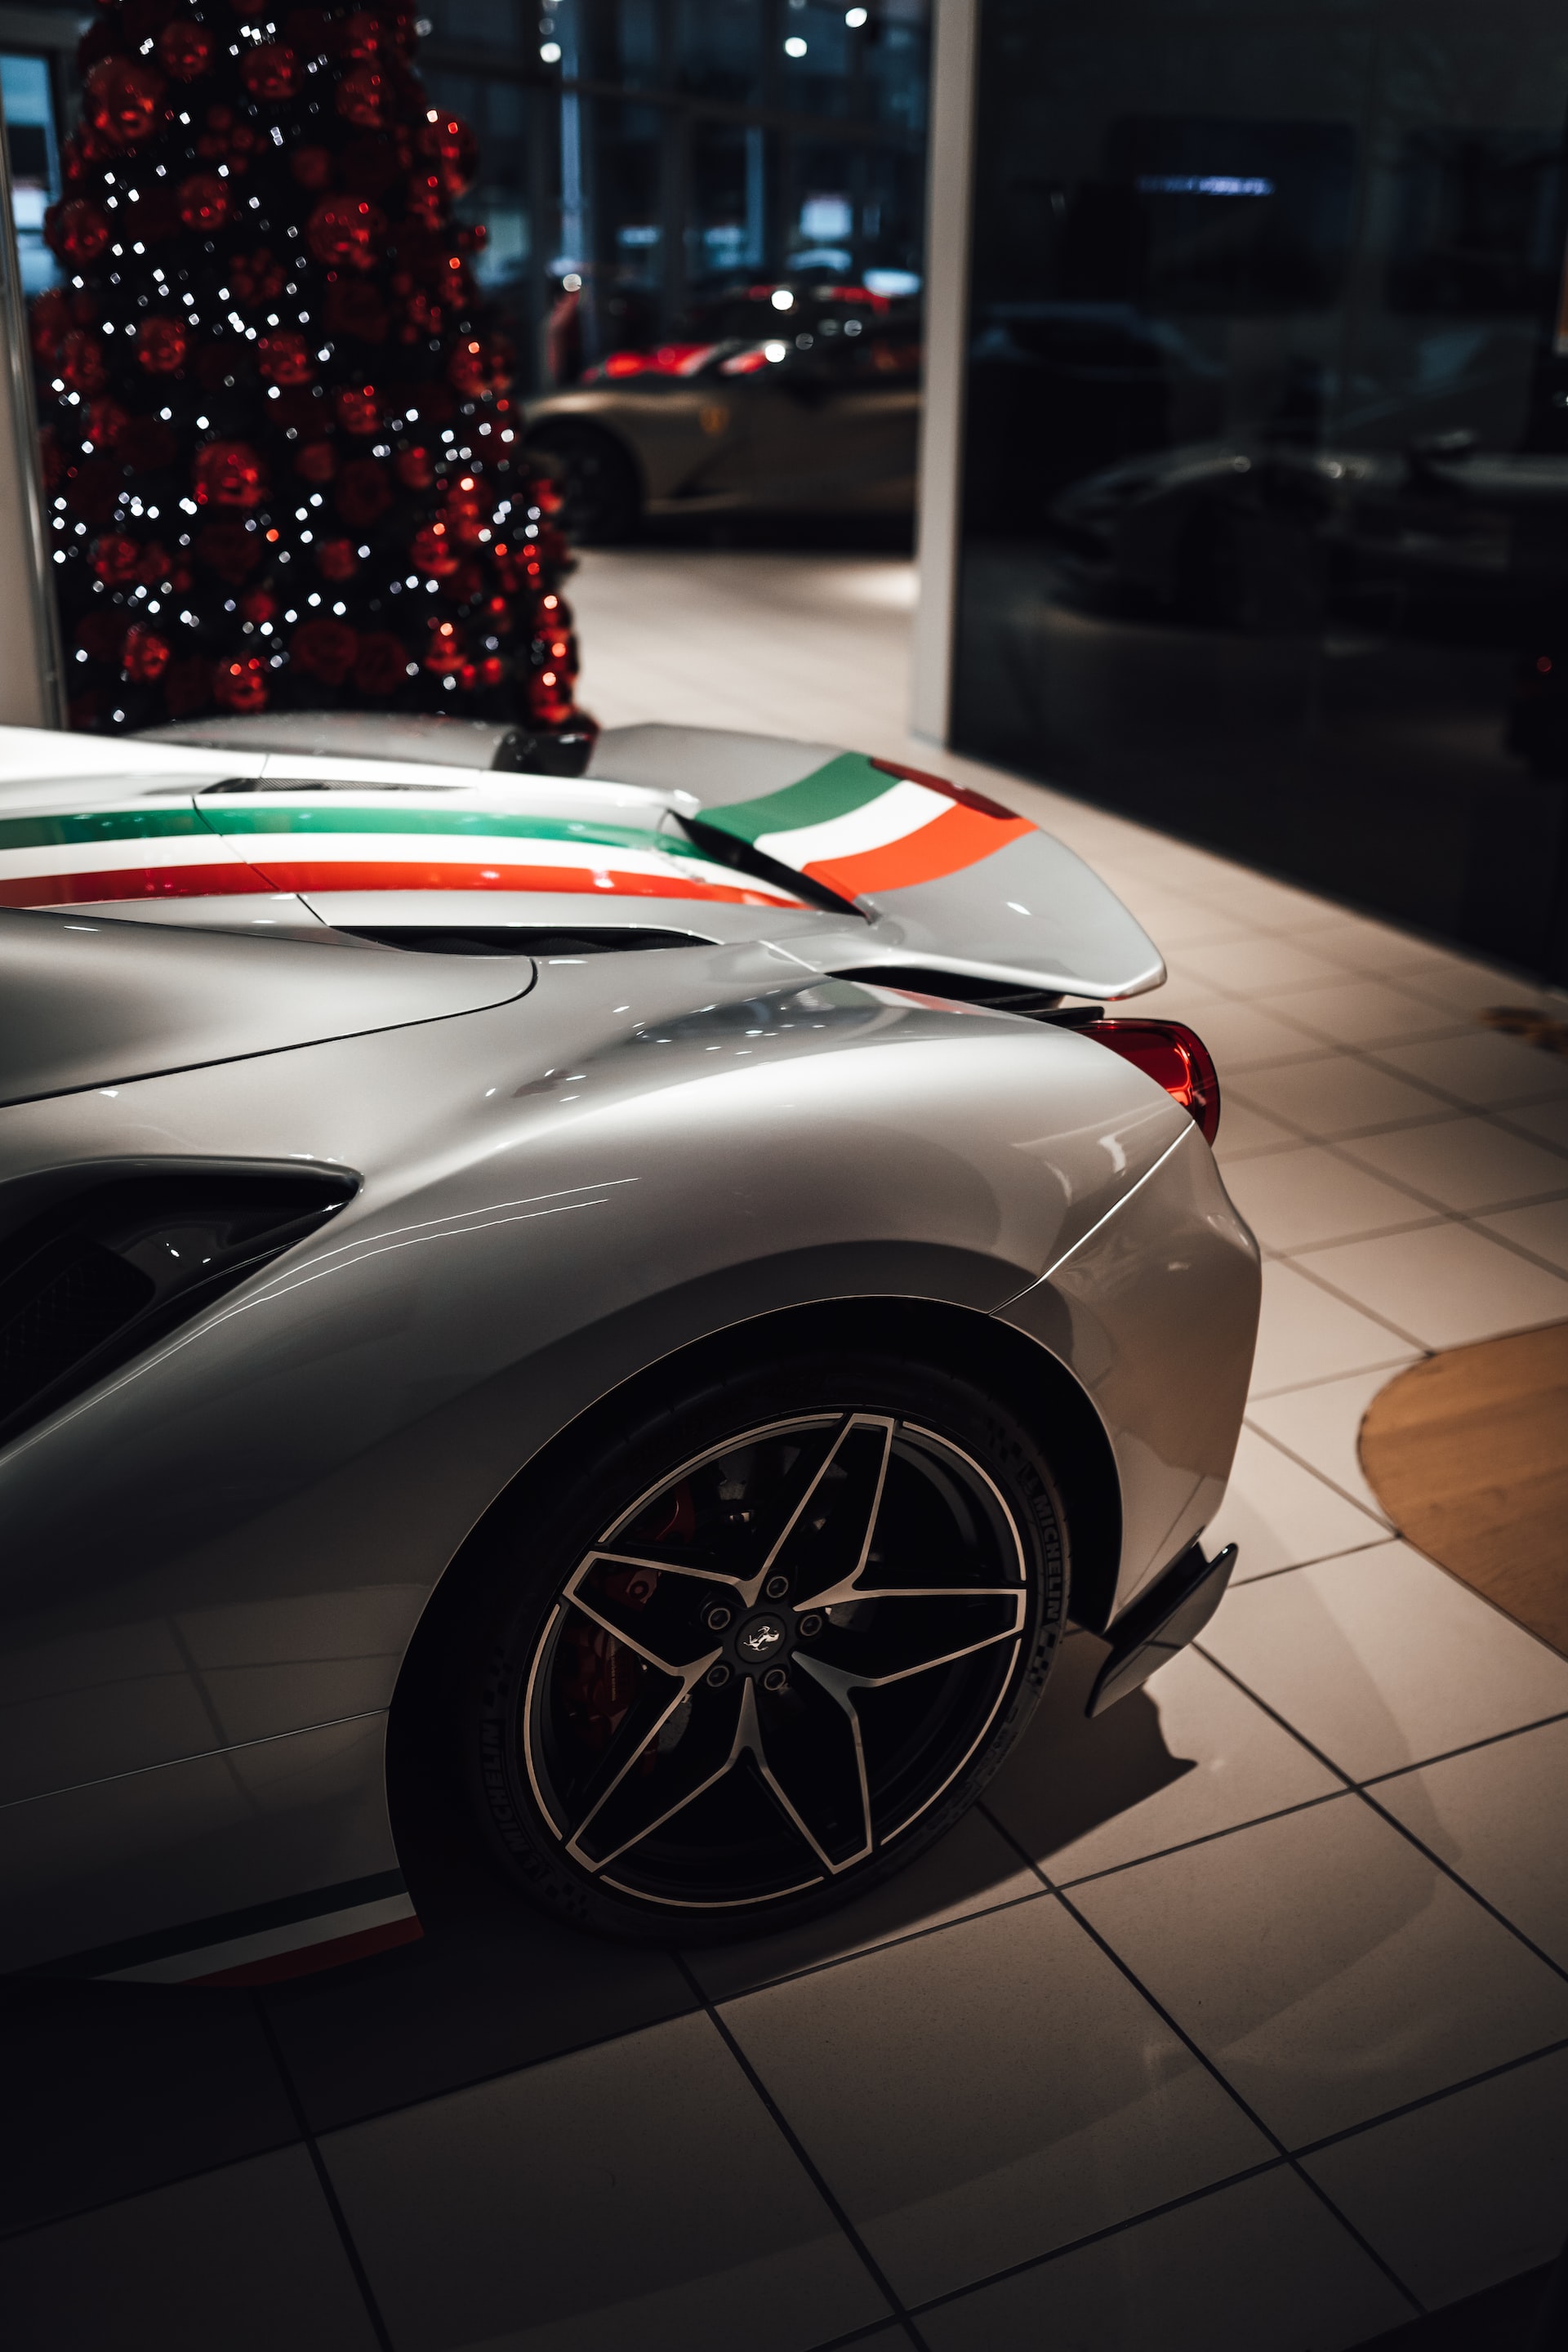 The perfect Christmas gift for a Ferrari lover: a Ferrari tour of Italy